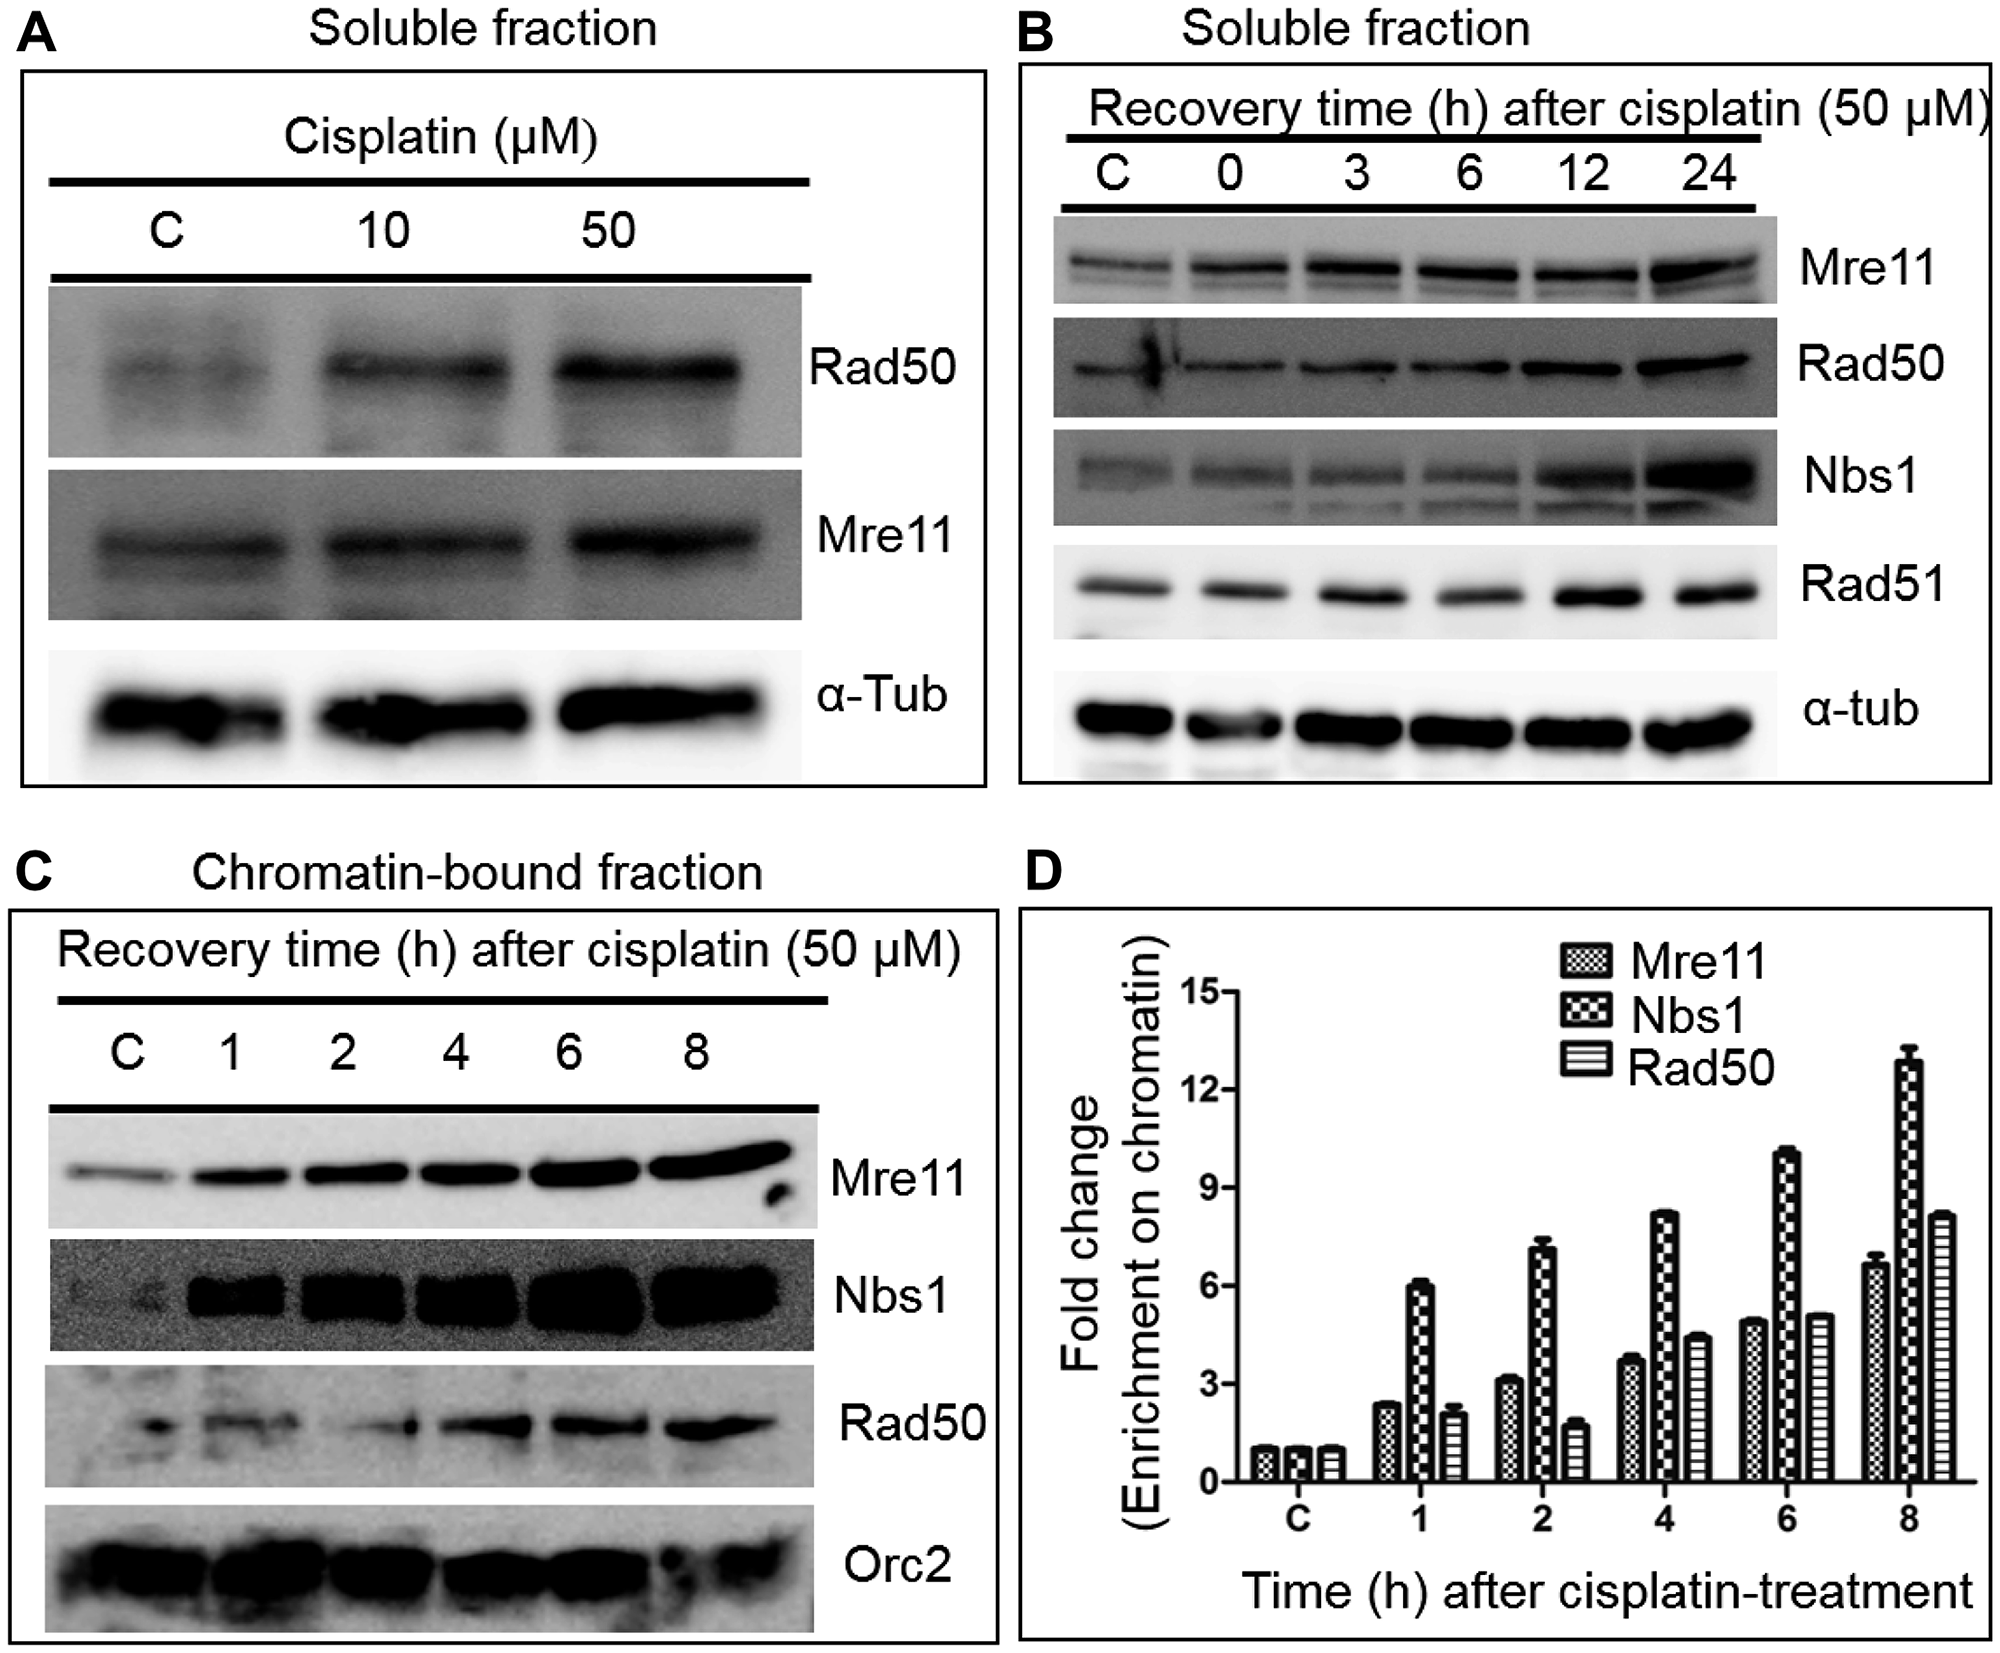 Cisplatin treatment significantly increases the levels of MRN complex subunits in HeLa cells.